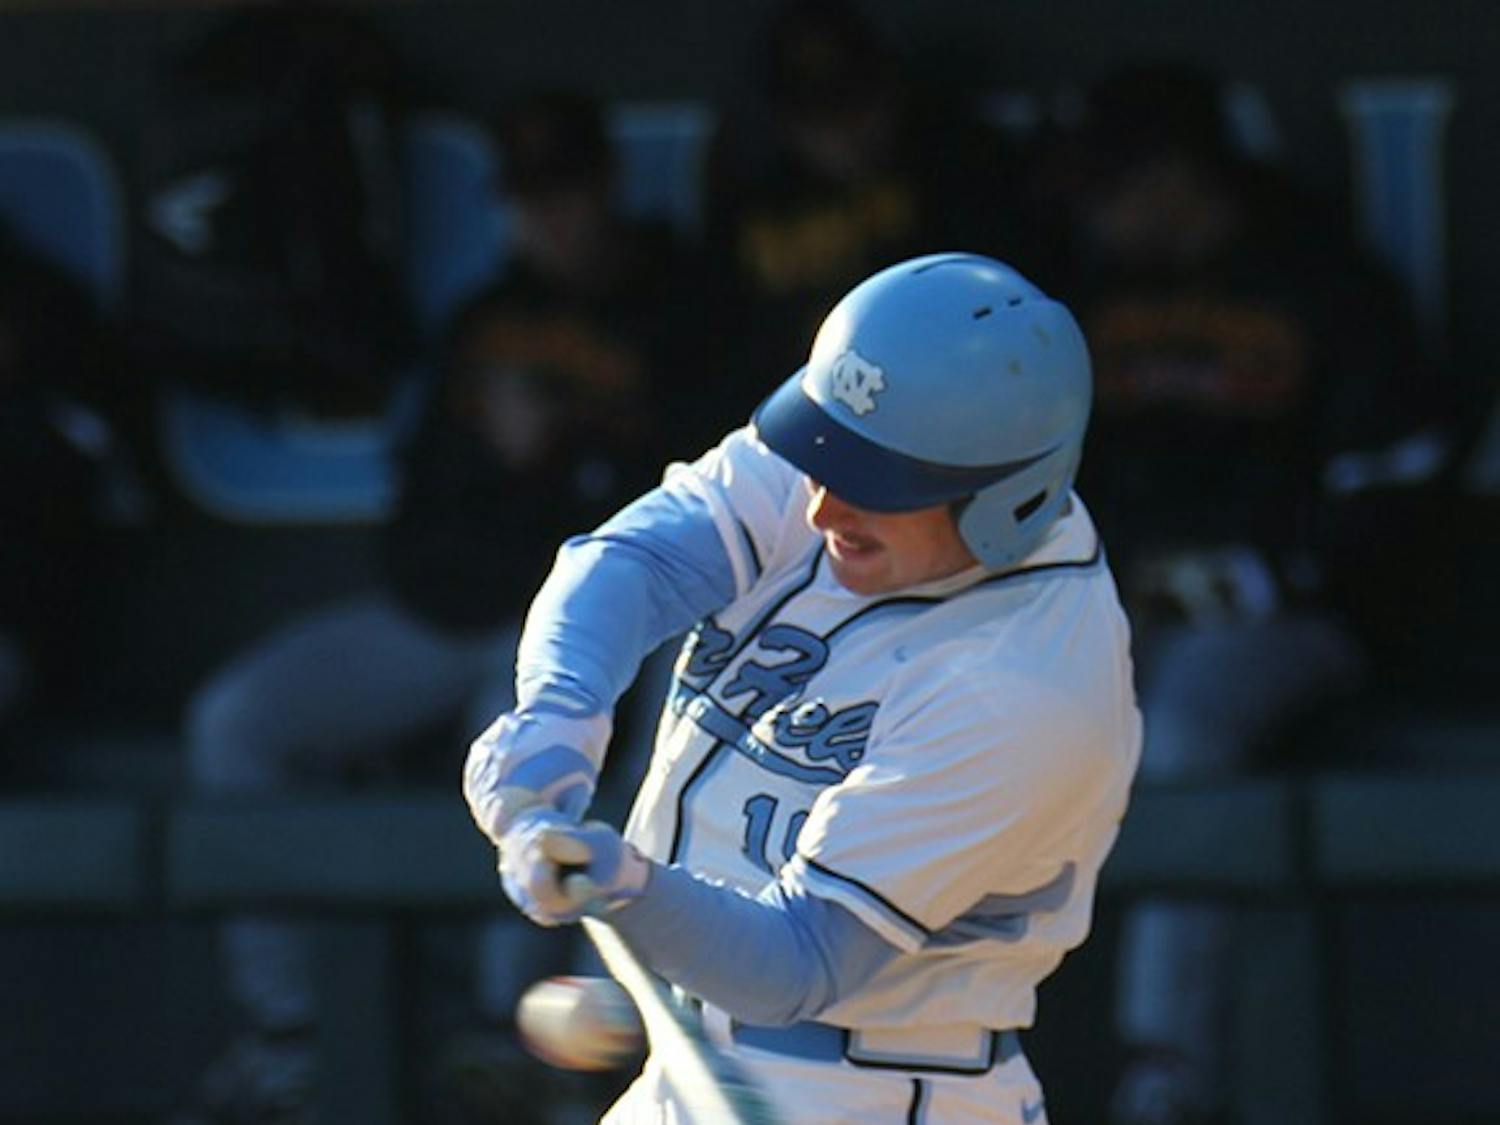 The UNC baseball team faced off against Winthrop on March 26, 2014 at Boshamer Stadium in Chapel Hill, NC. Winthrop emerged victorious by a score of 3-1. 